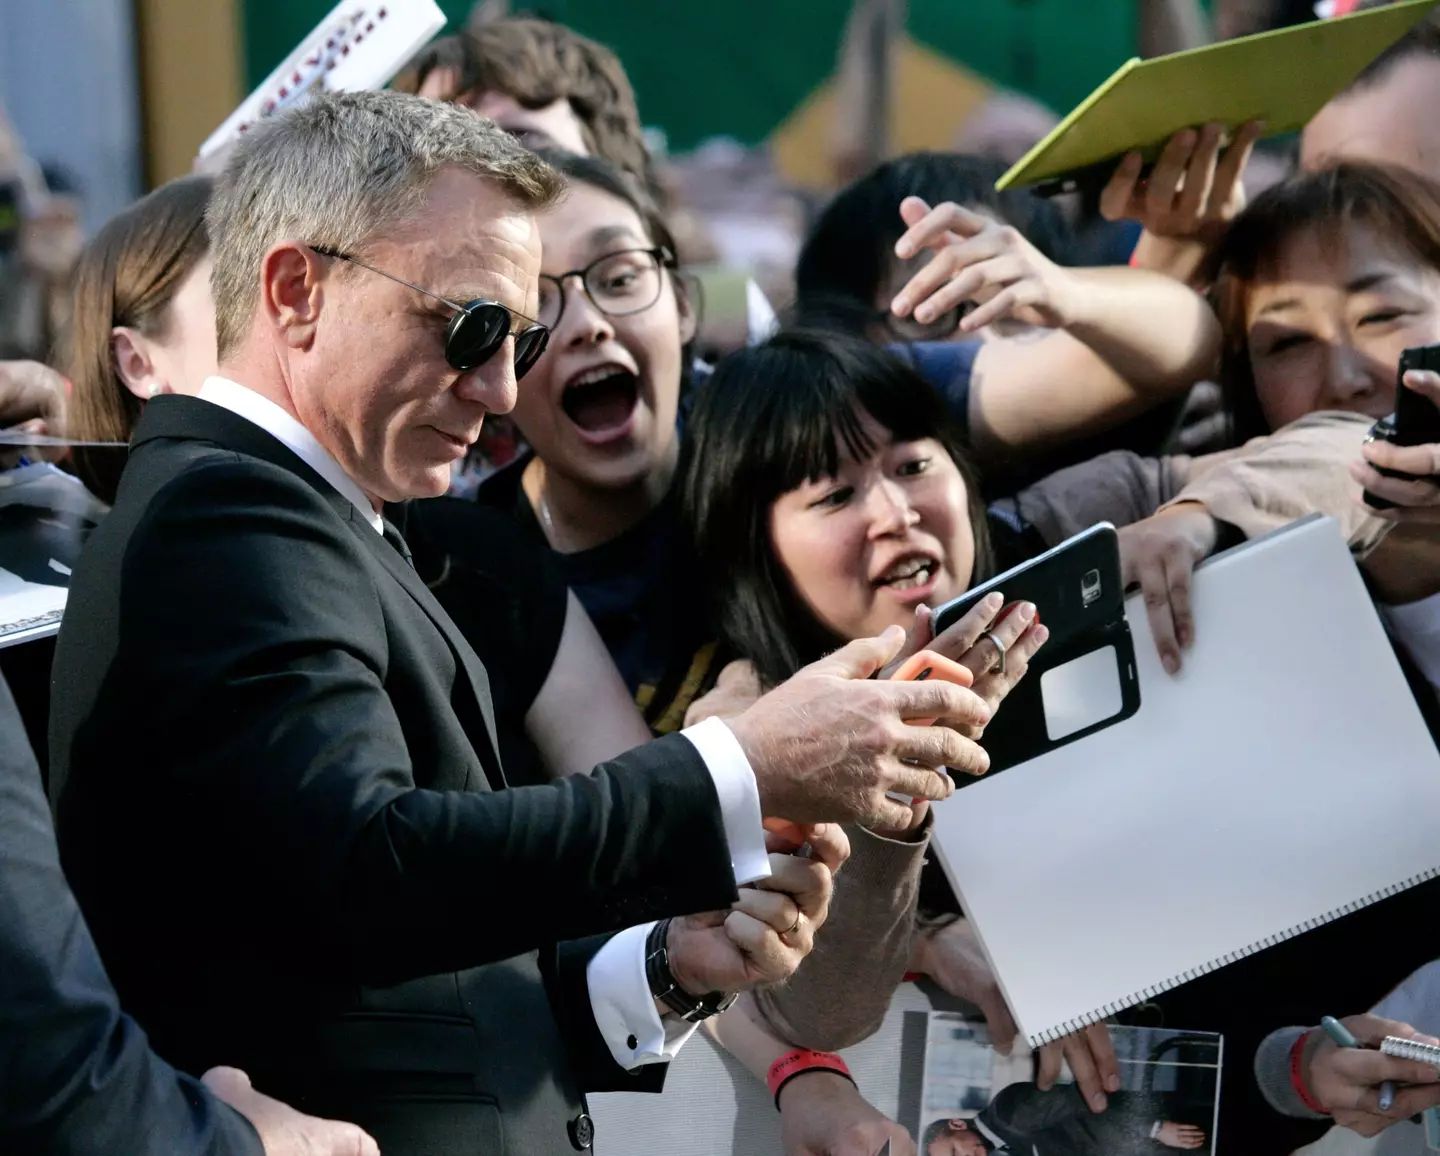 Daniel Craig at the premiere of "Knives Out" during the 2019 Toronto International Film Festival